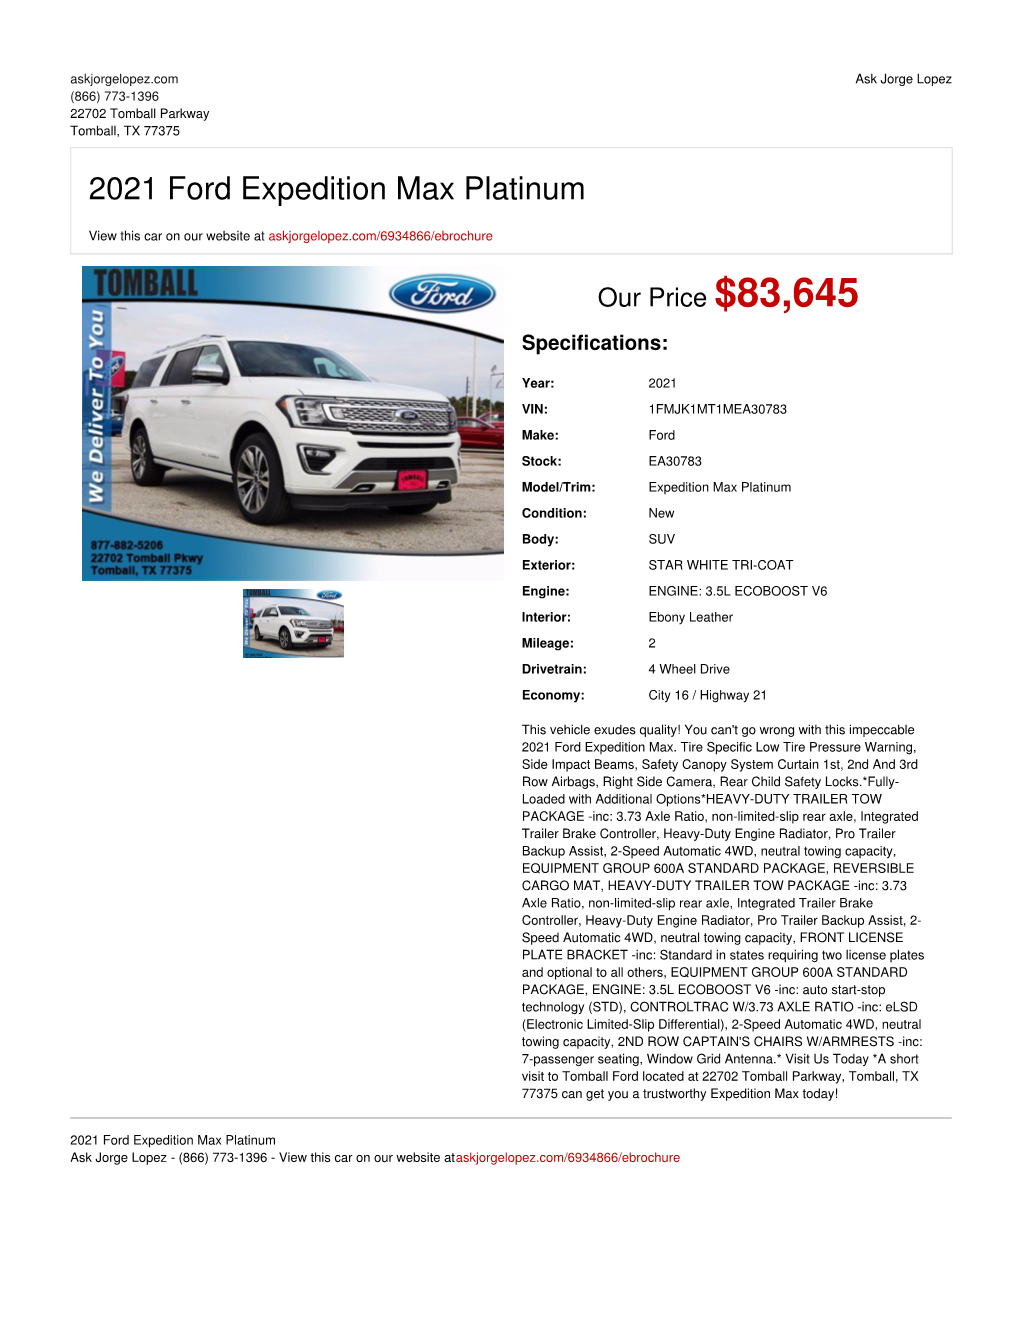 2021 Ford Expedition Max Platinum | Tomball, TX | Ask Jorge Lopez